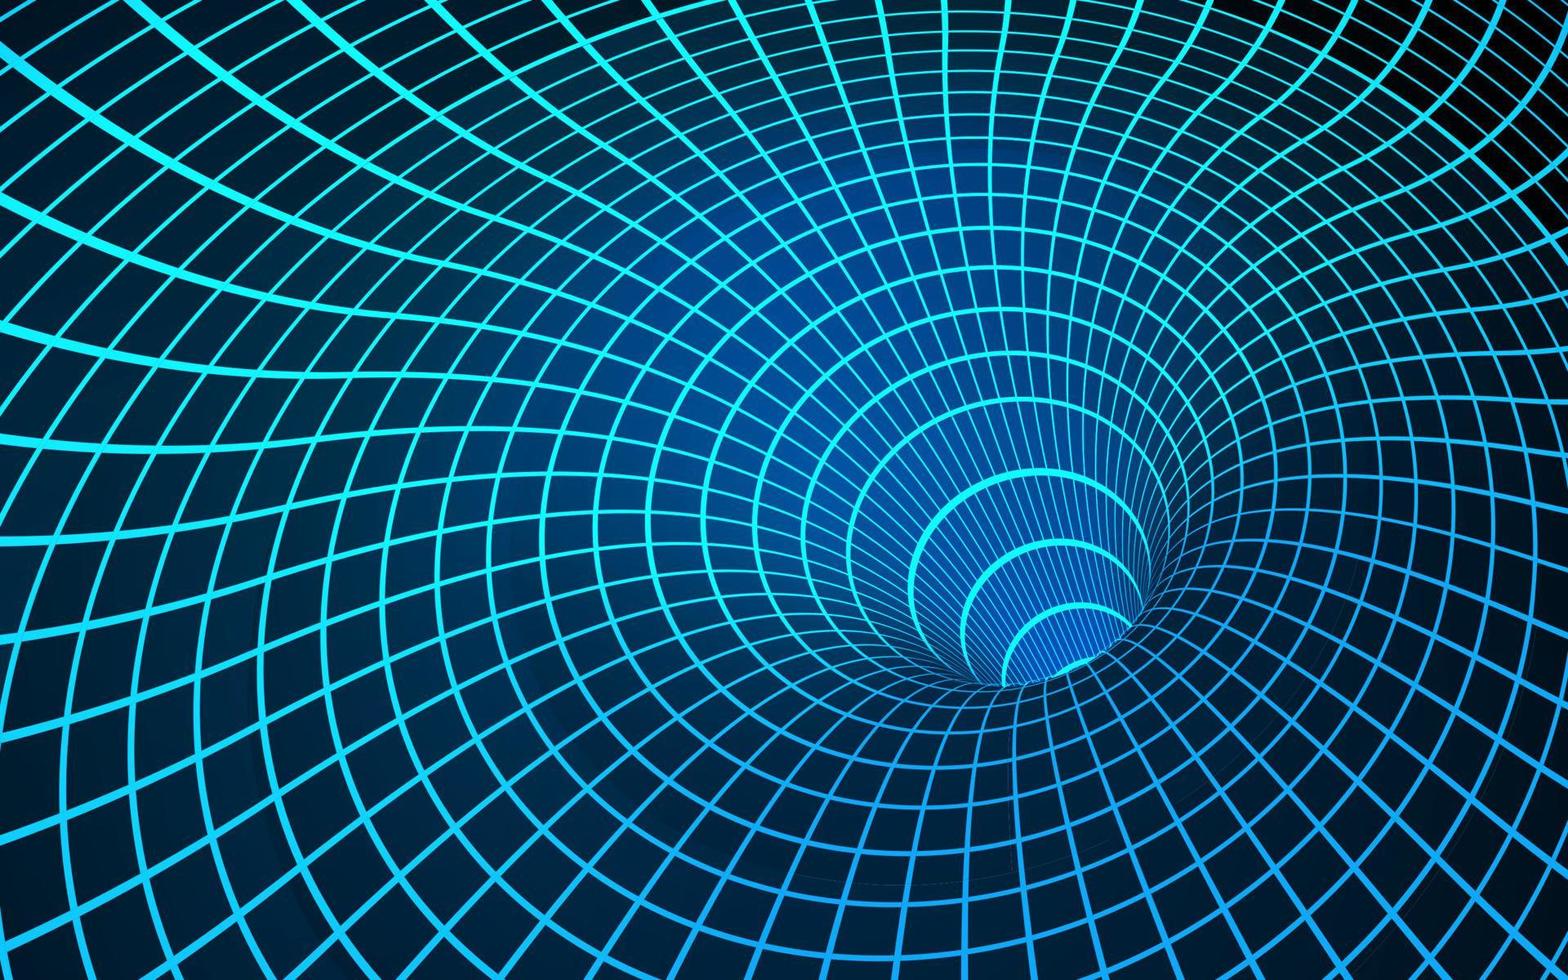 Digital visualisation of Black Hole. Wormhole. Singularity and event horizon - warp space and time. Vector illustration